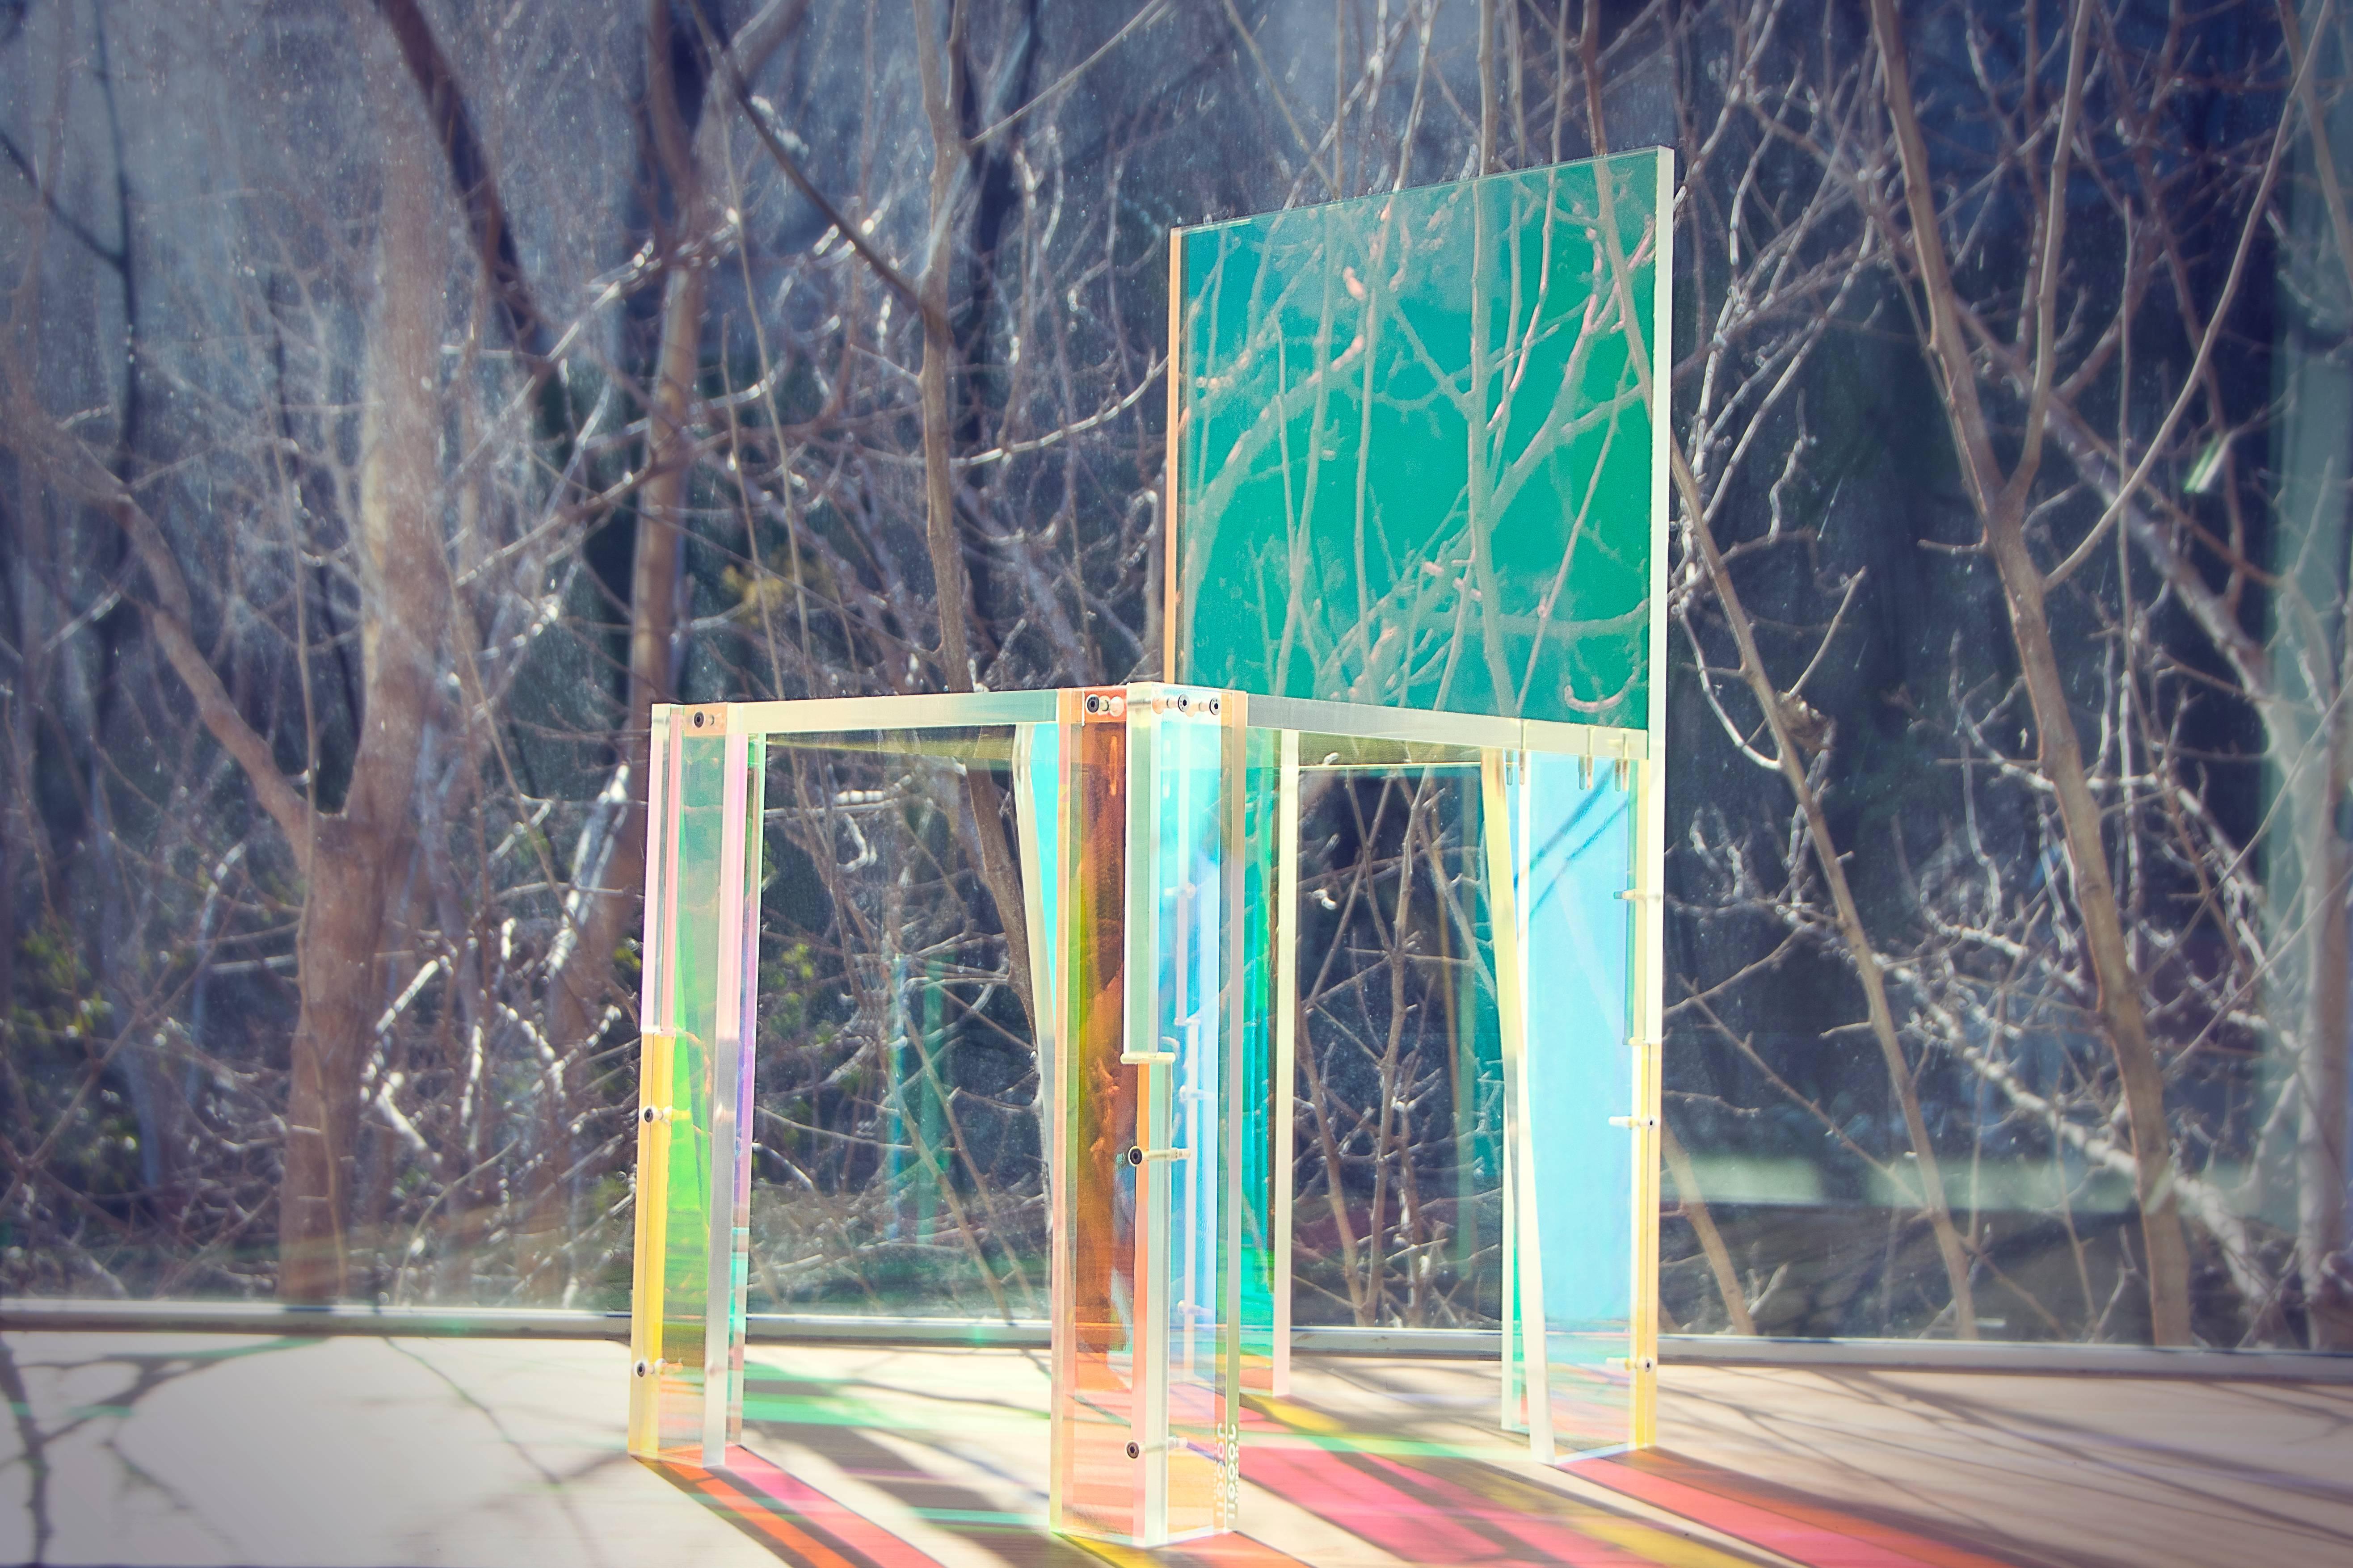 Giorgio chair by Diogo and Juliette Felippelli

Dichroic film on acrylic
Measures: 16